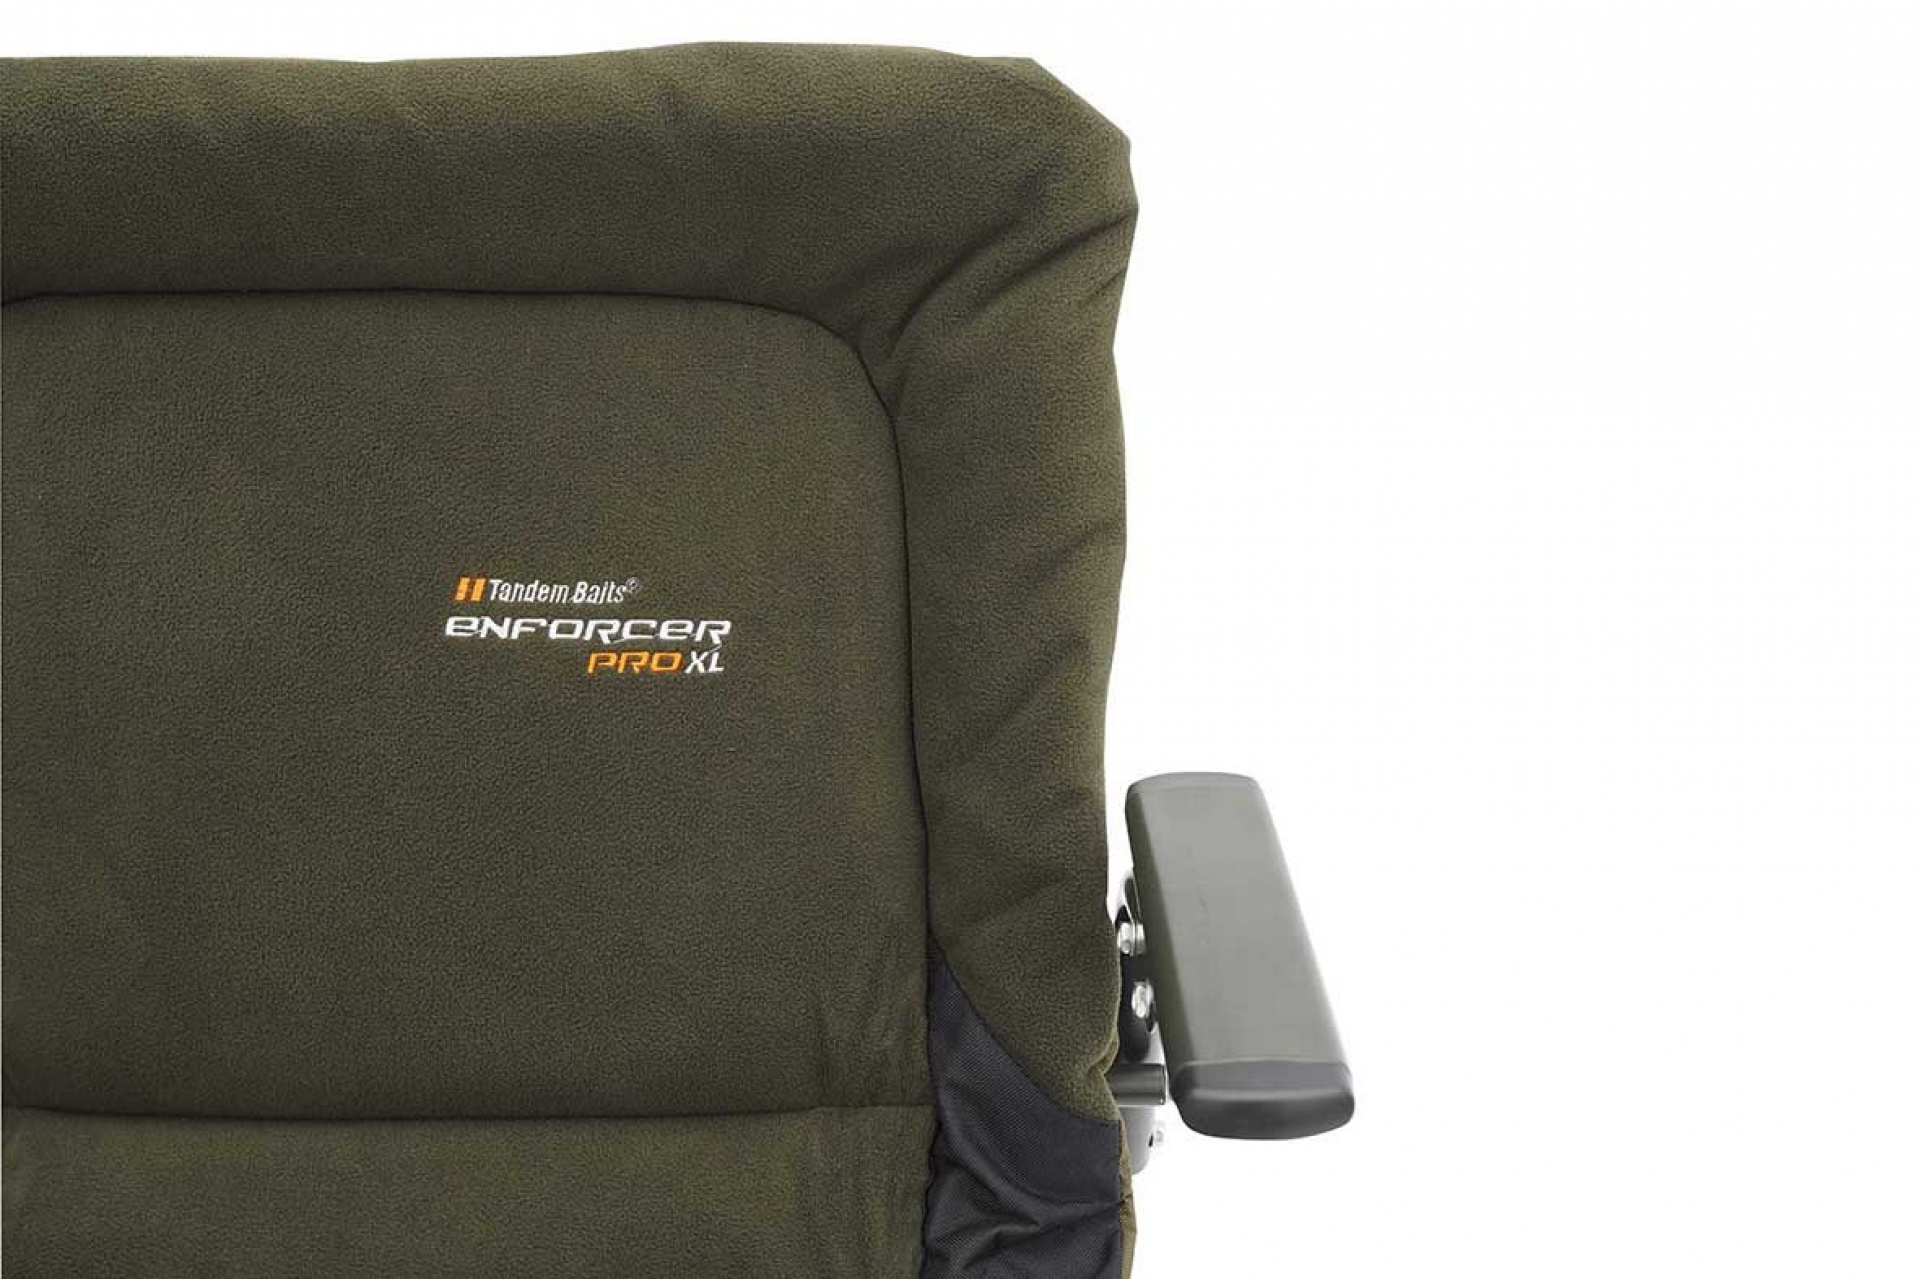 TandemBaits Enforcer Pro XL Chair